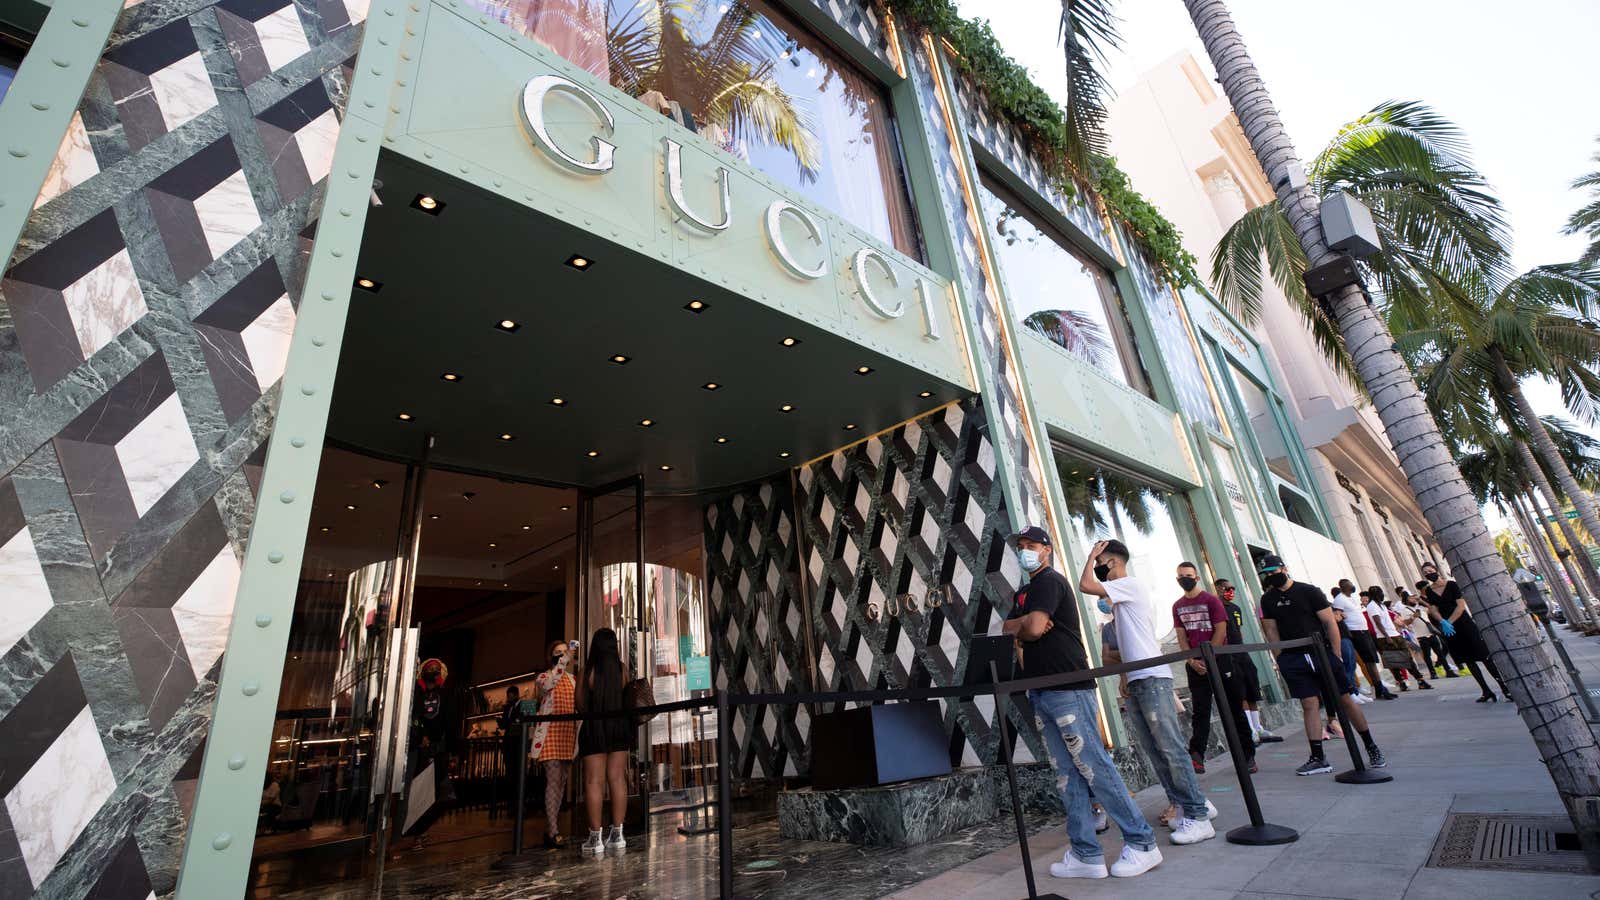 Gucci and other luxury labels have seen their sales shift as tourists stay put and make more purchases at home.